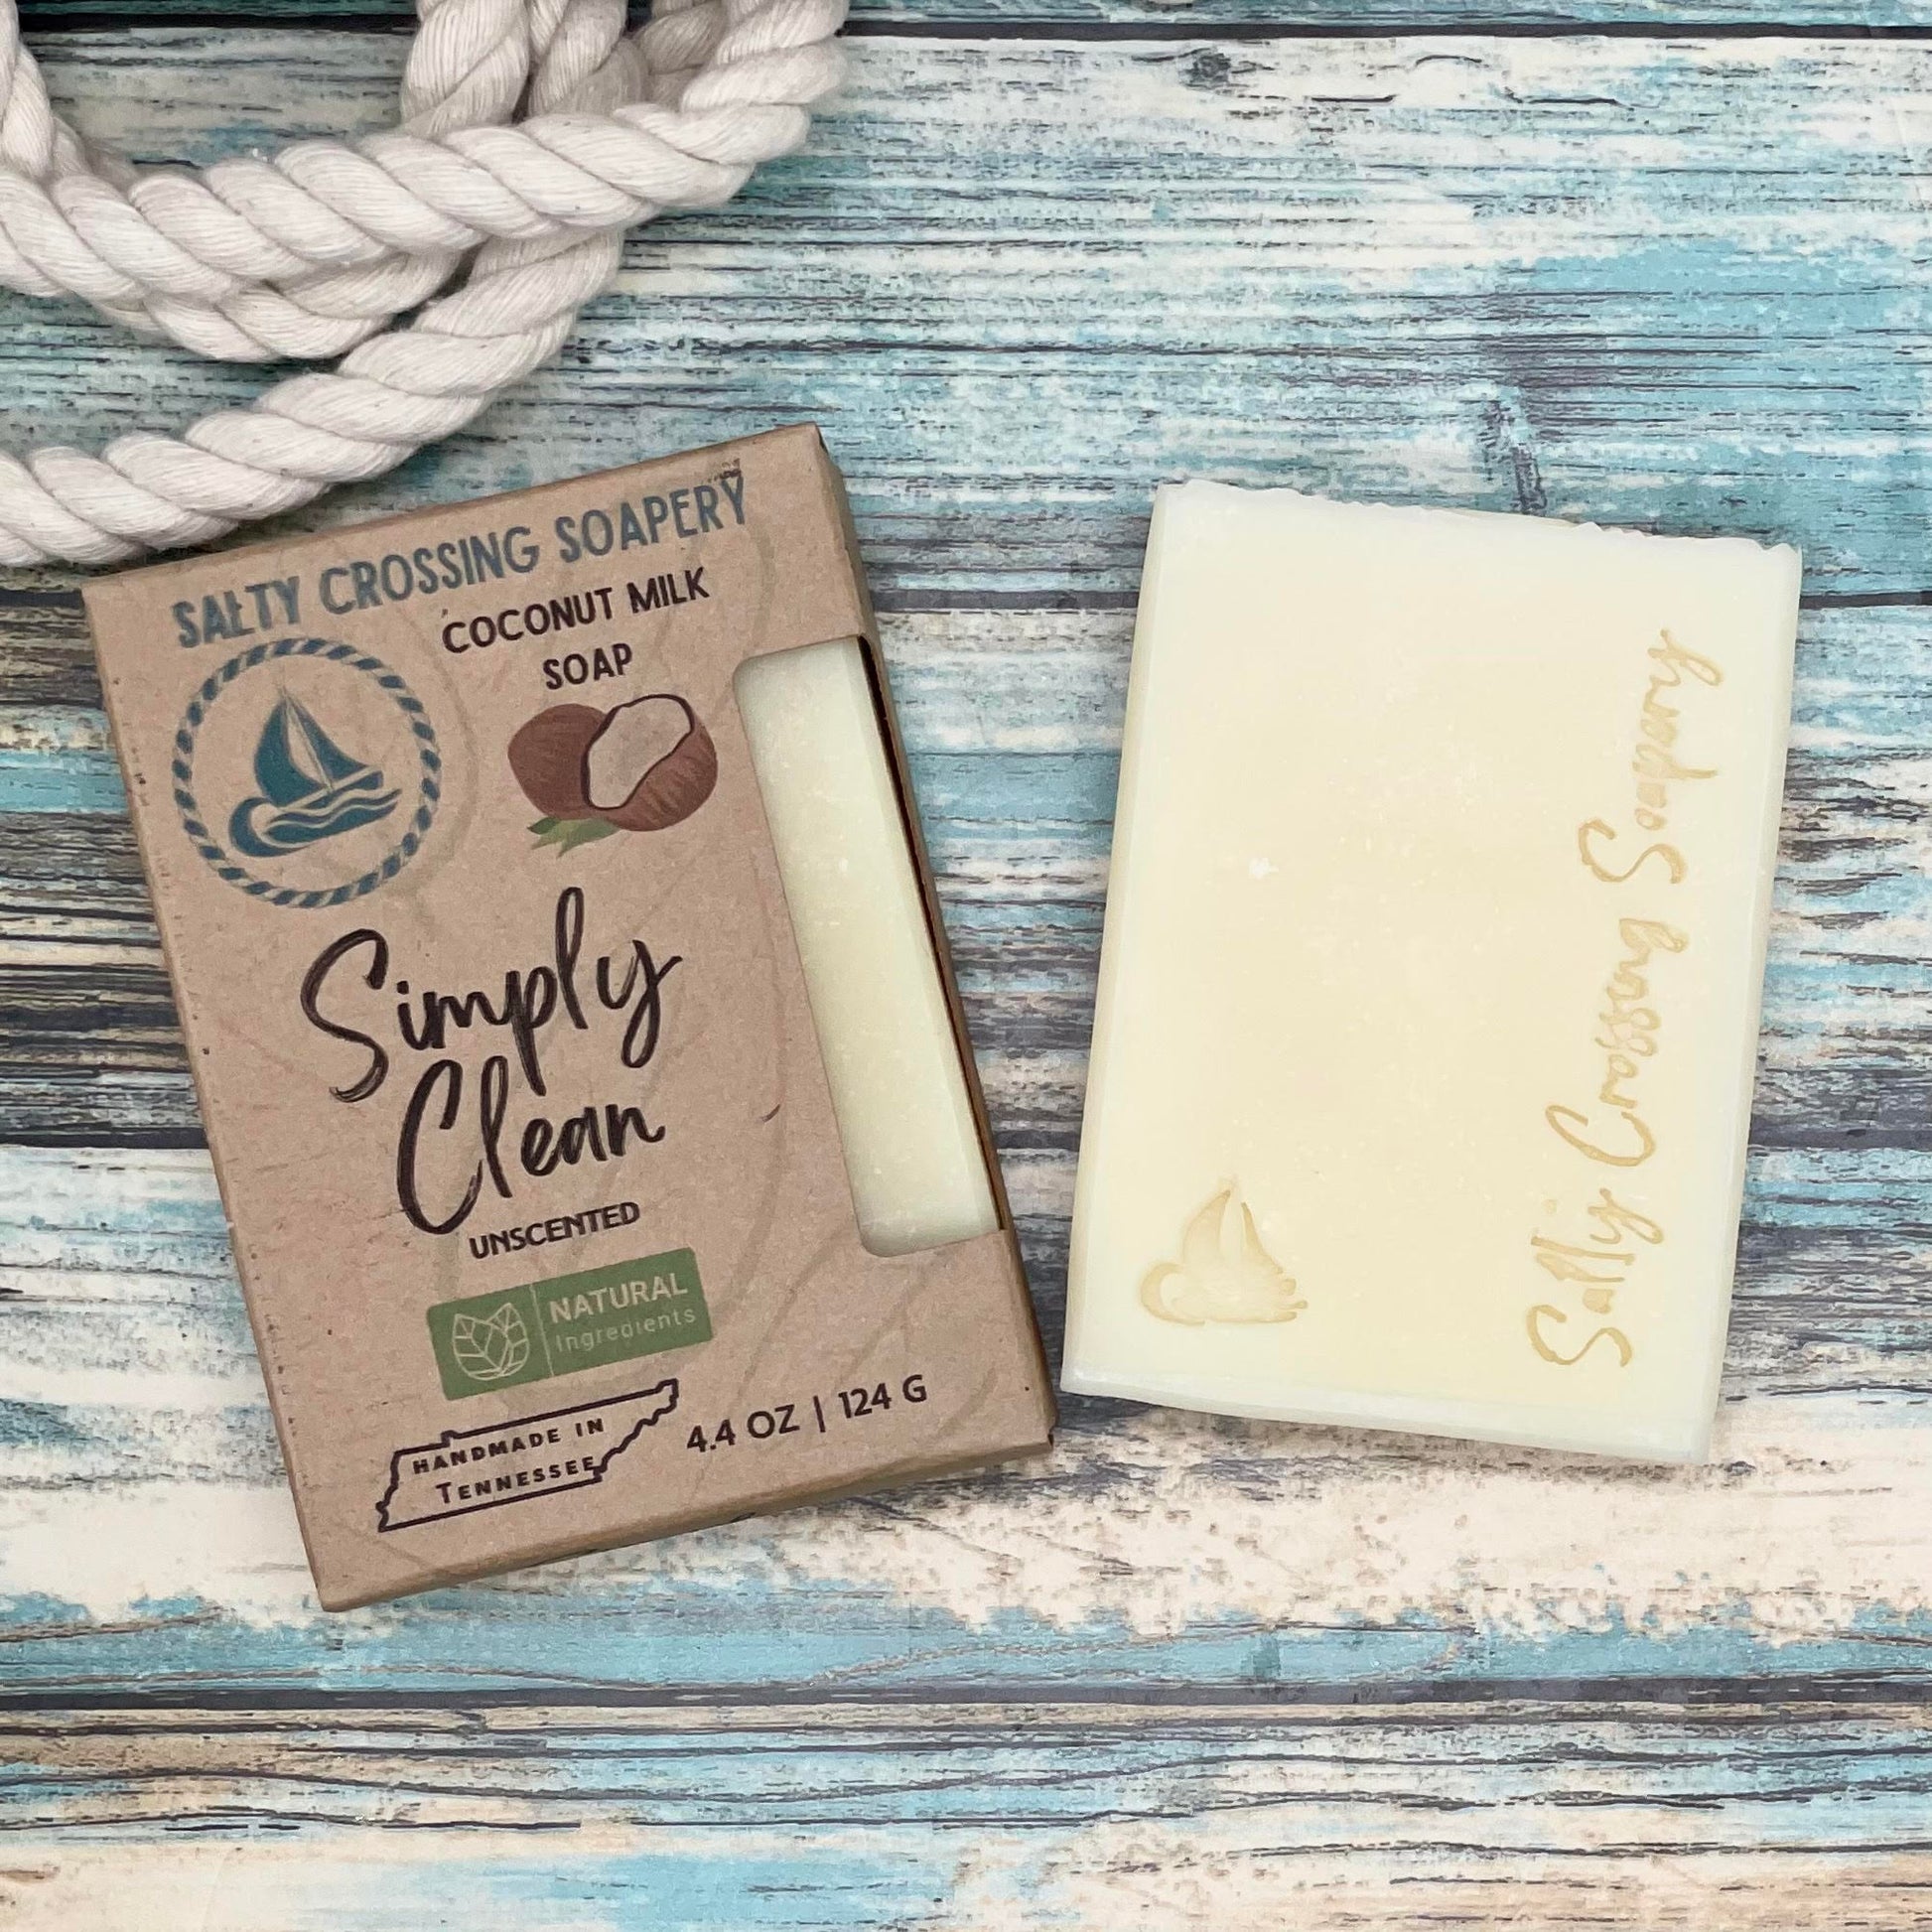 Simply clean soap bar with box pour white bar stamped with a small sailboat and text salty crossing Soapery